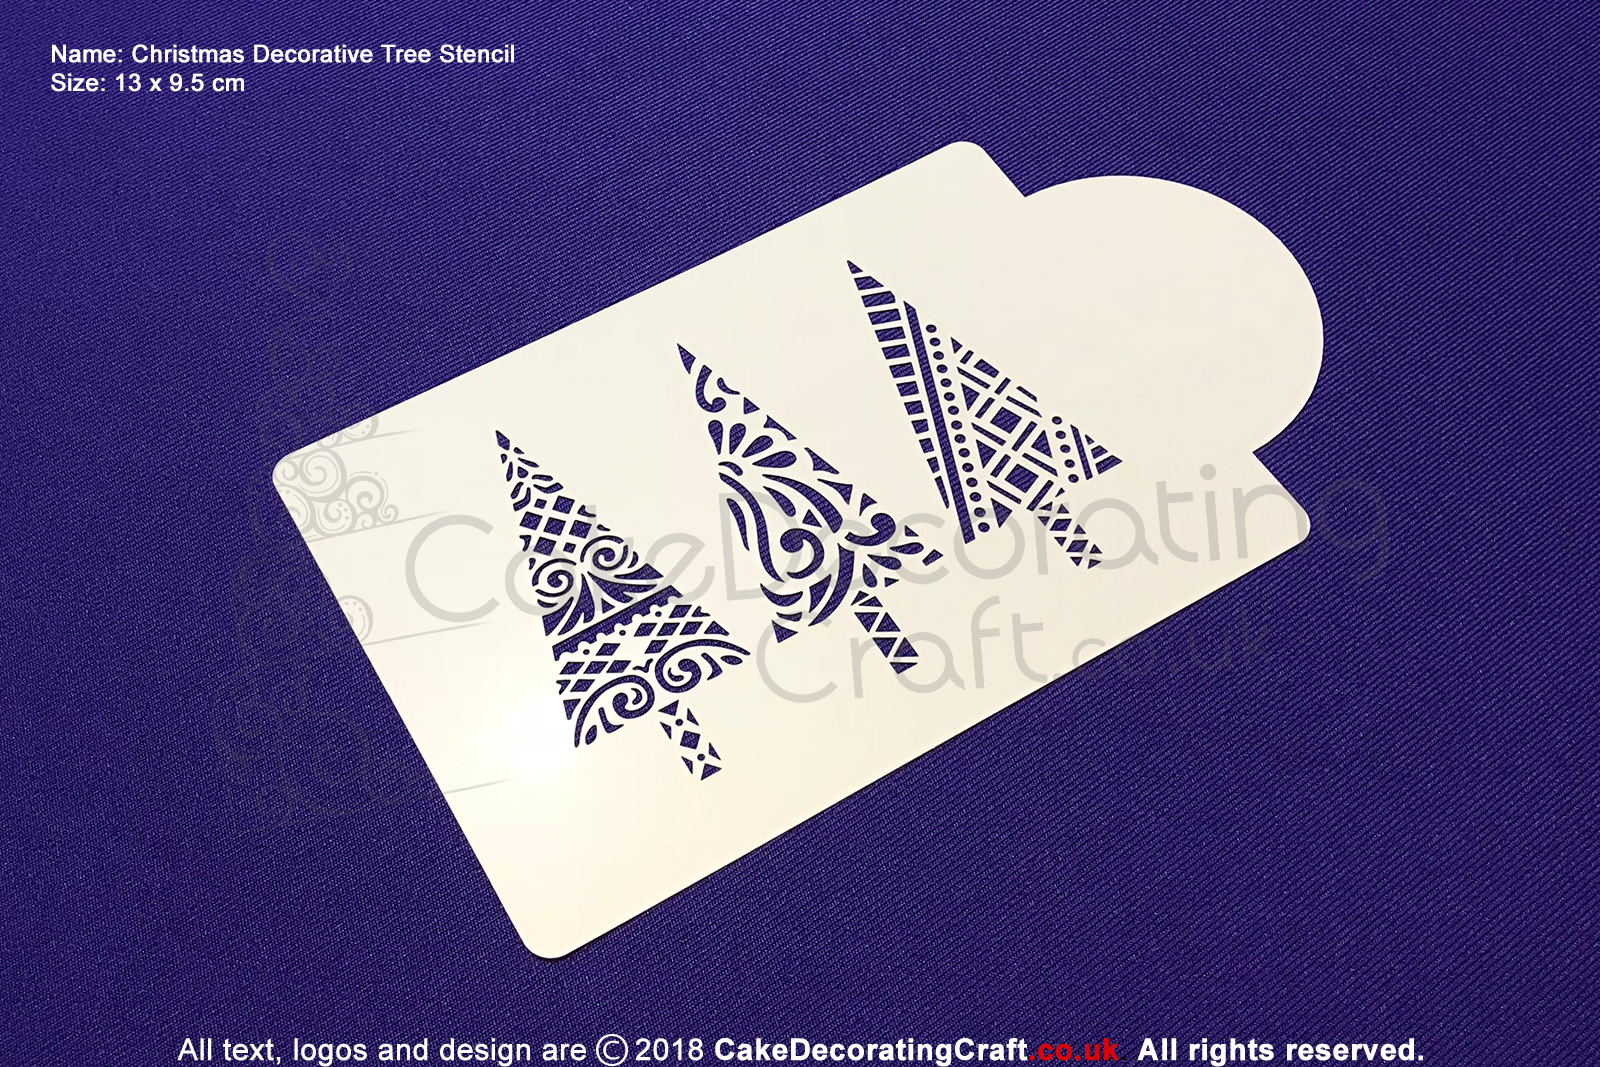 Christmas Decorative Tree Stencil | Air Brush Stenciling | Cake and Cupcake Decorating Craft Tool